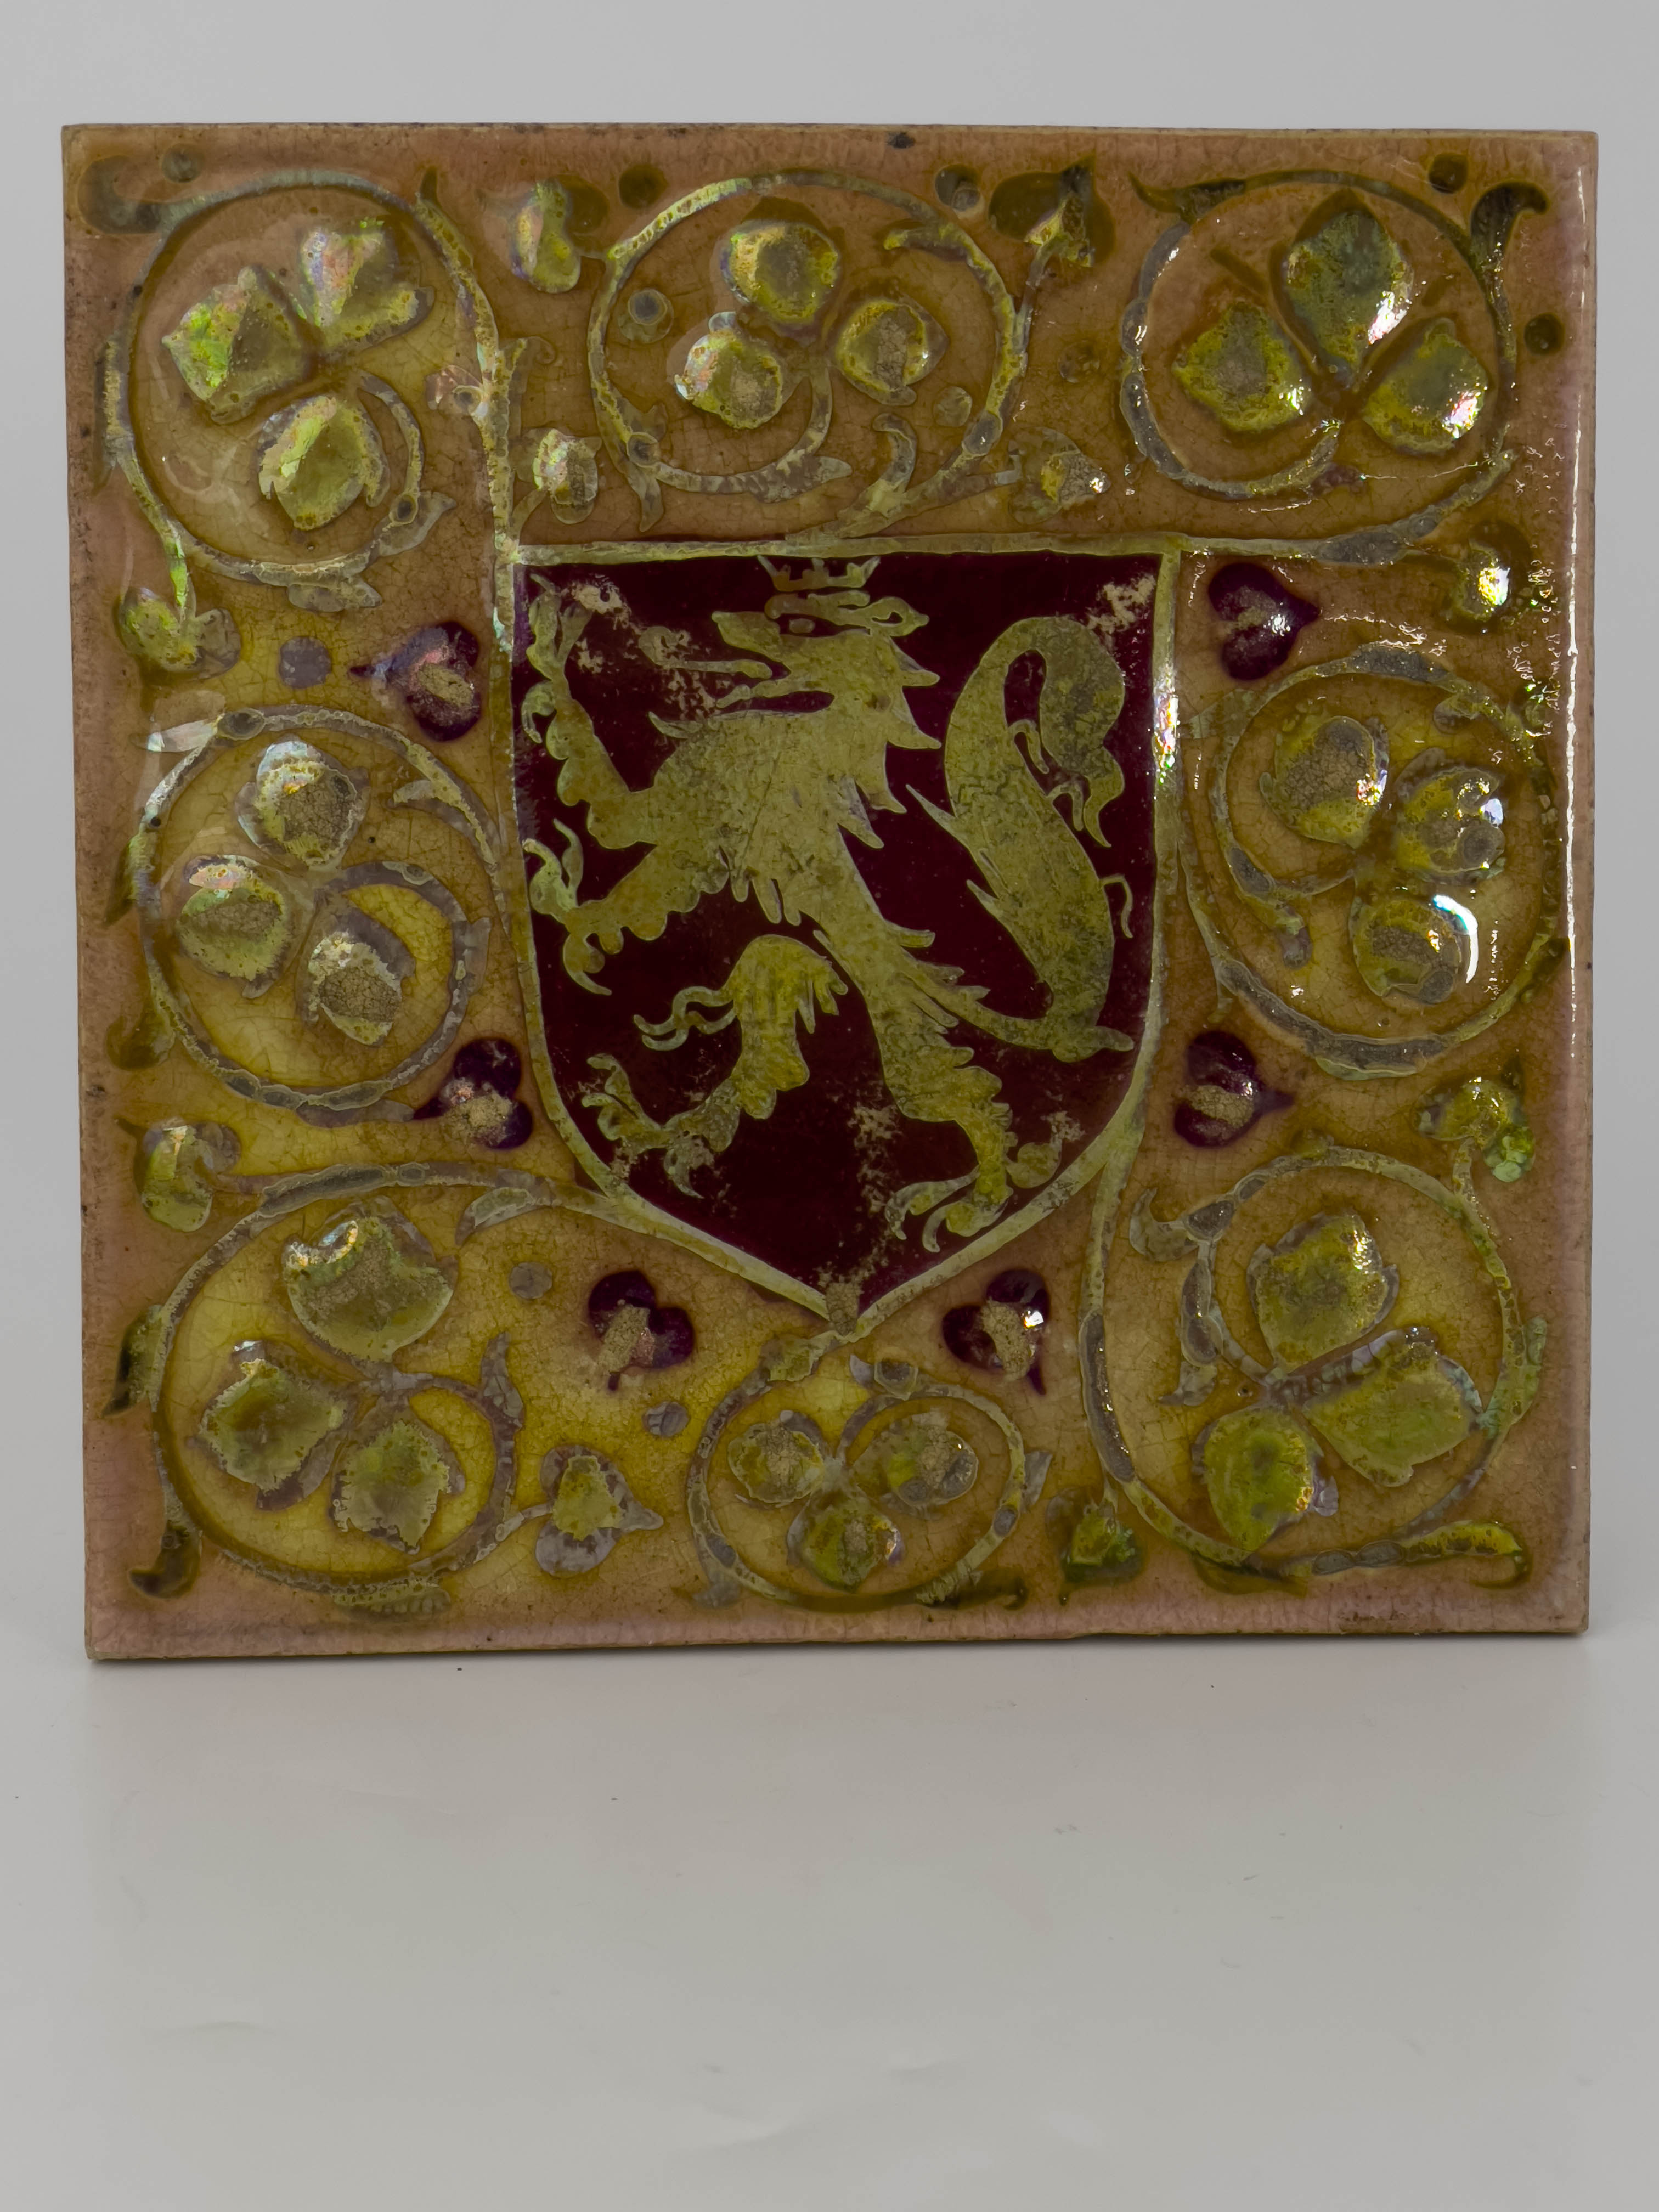 Pilkington, a Royal Lancastrian relief moulded heraldic lustre tile, painted with a red shield